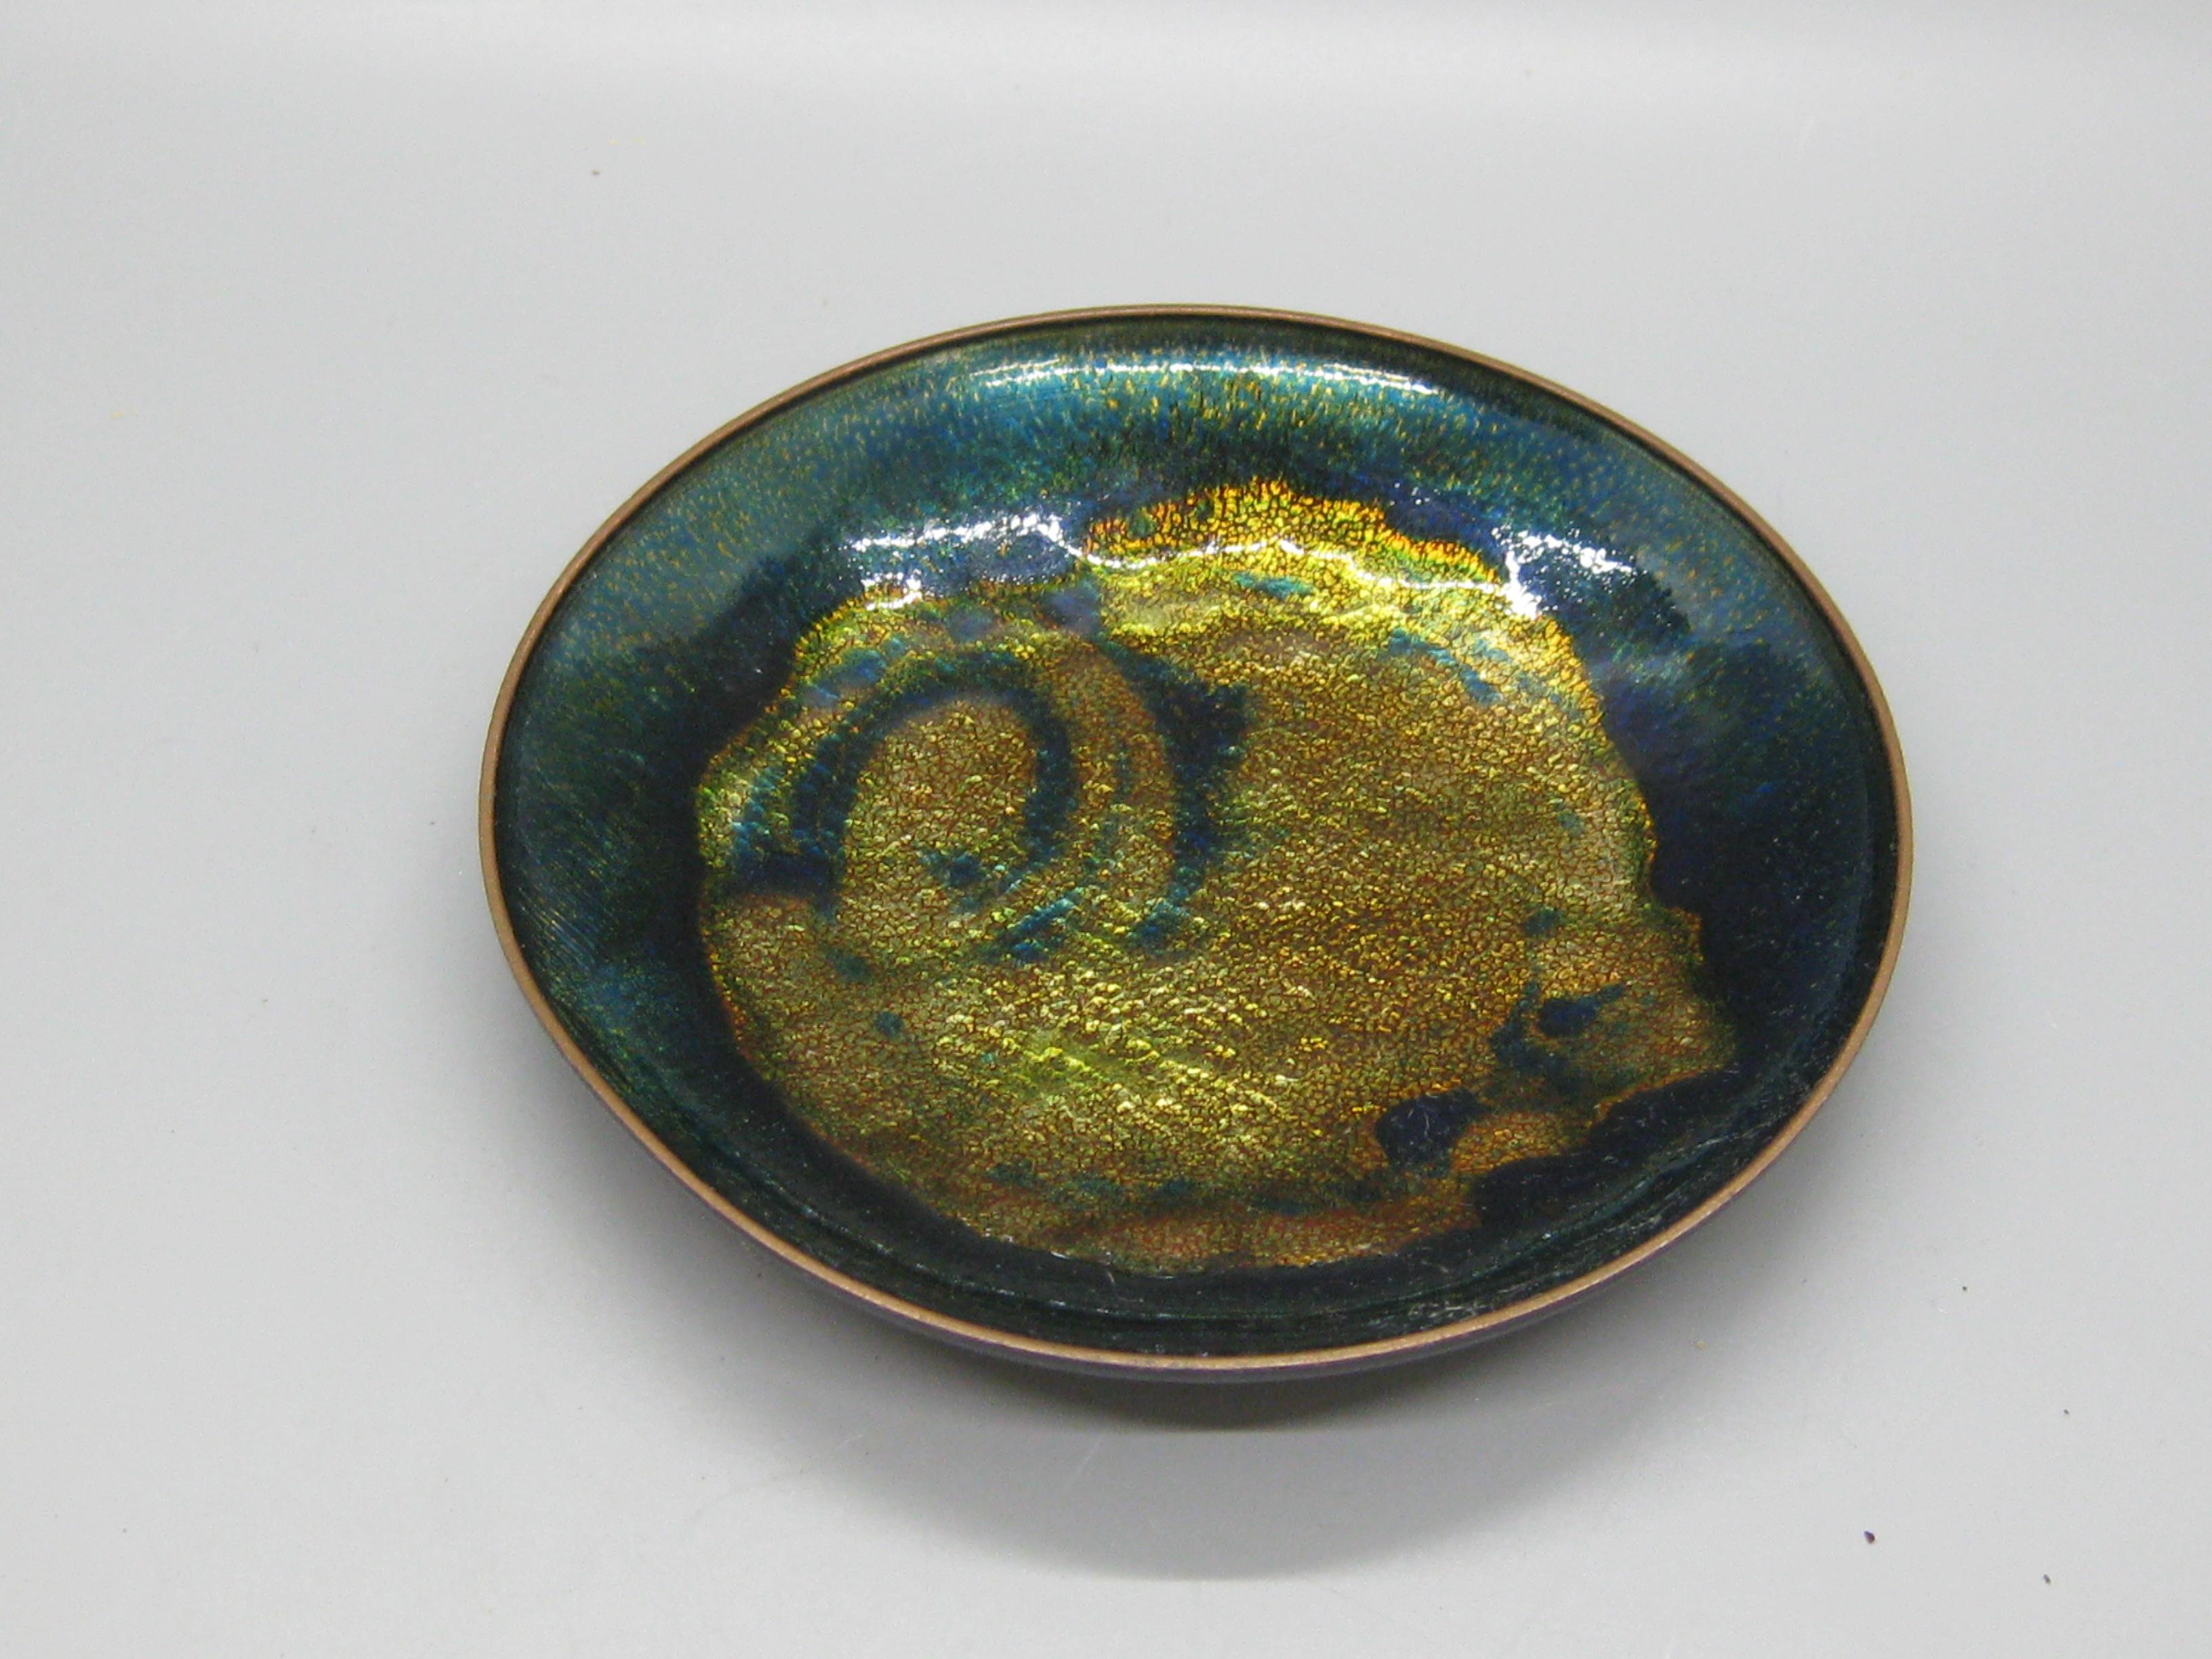 Great hand made enamel on copper dish by Norwegian artist Anne-Grete Ploen and dates from the 1960's. Made in Norway and is signed on the bottom. Great abstract design and wonderful color. In very nice original condition. Measures 5 1/8